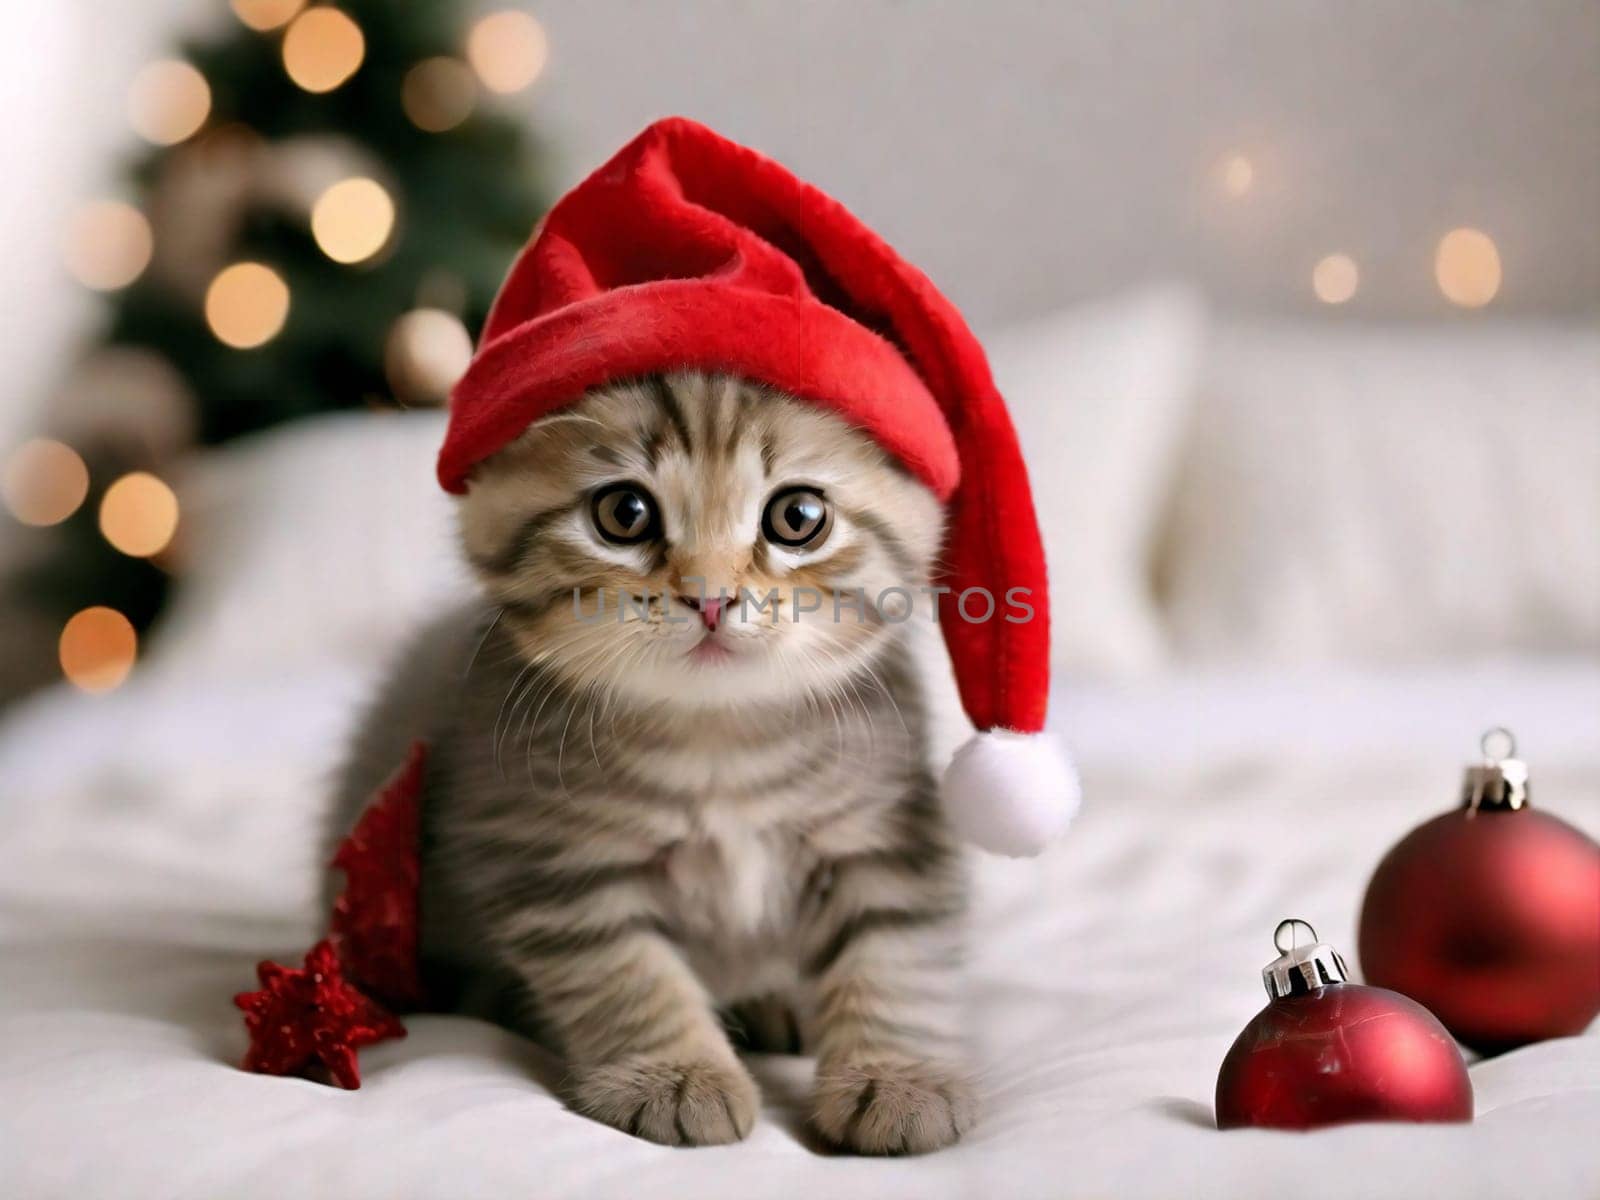 A Christmas card with a cat is a small curious funny striped Scottish fold kitten in Santa's Christmas red hat and Christmas tree toys on a white bed at home.